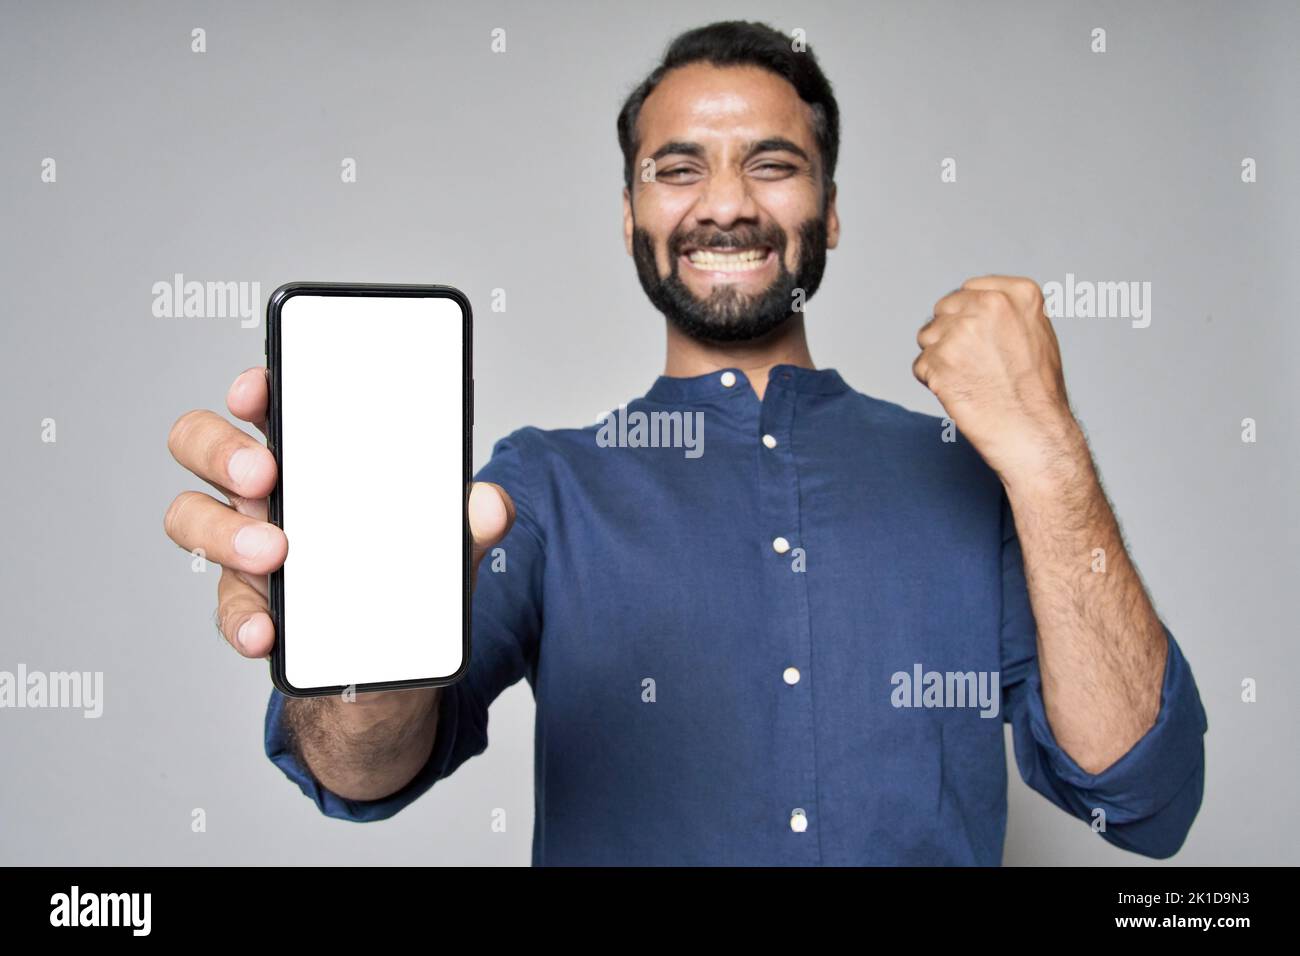 Happy indian business man isolated on gray showing mobile phone celebrating win. Stock Photo